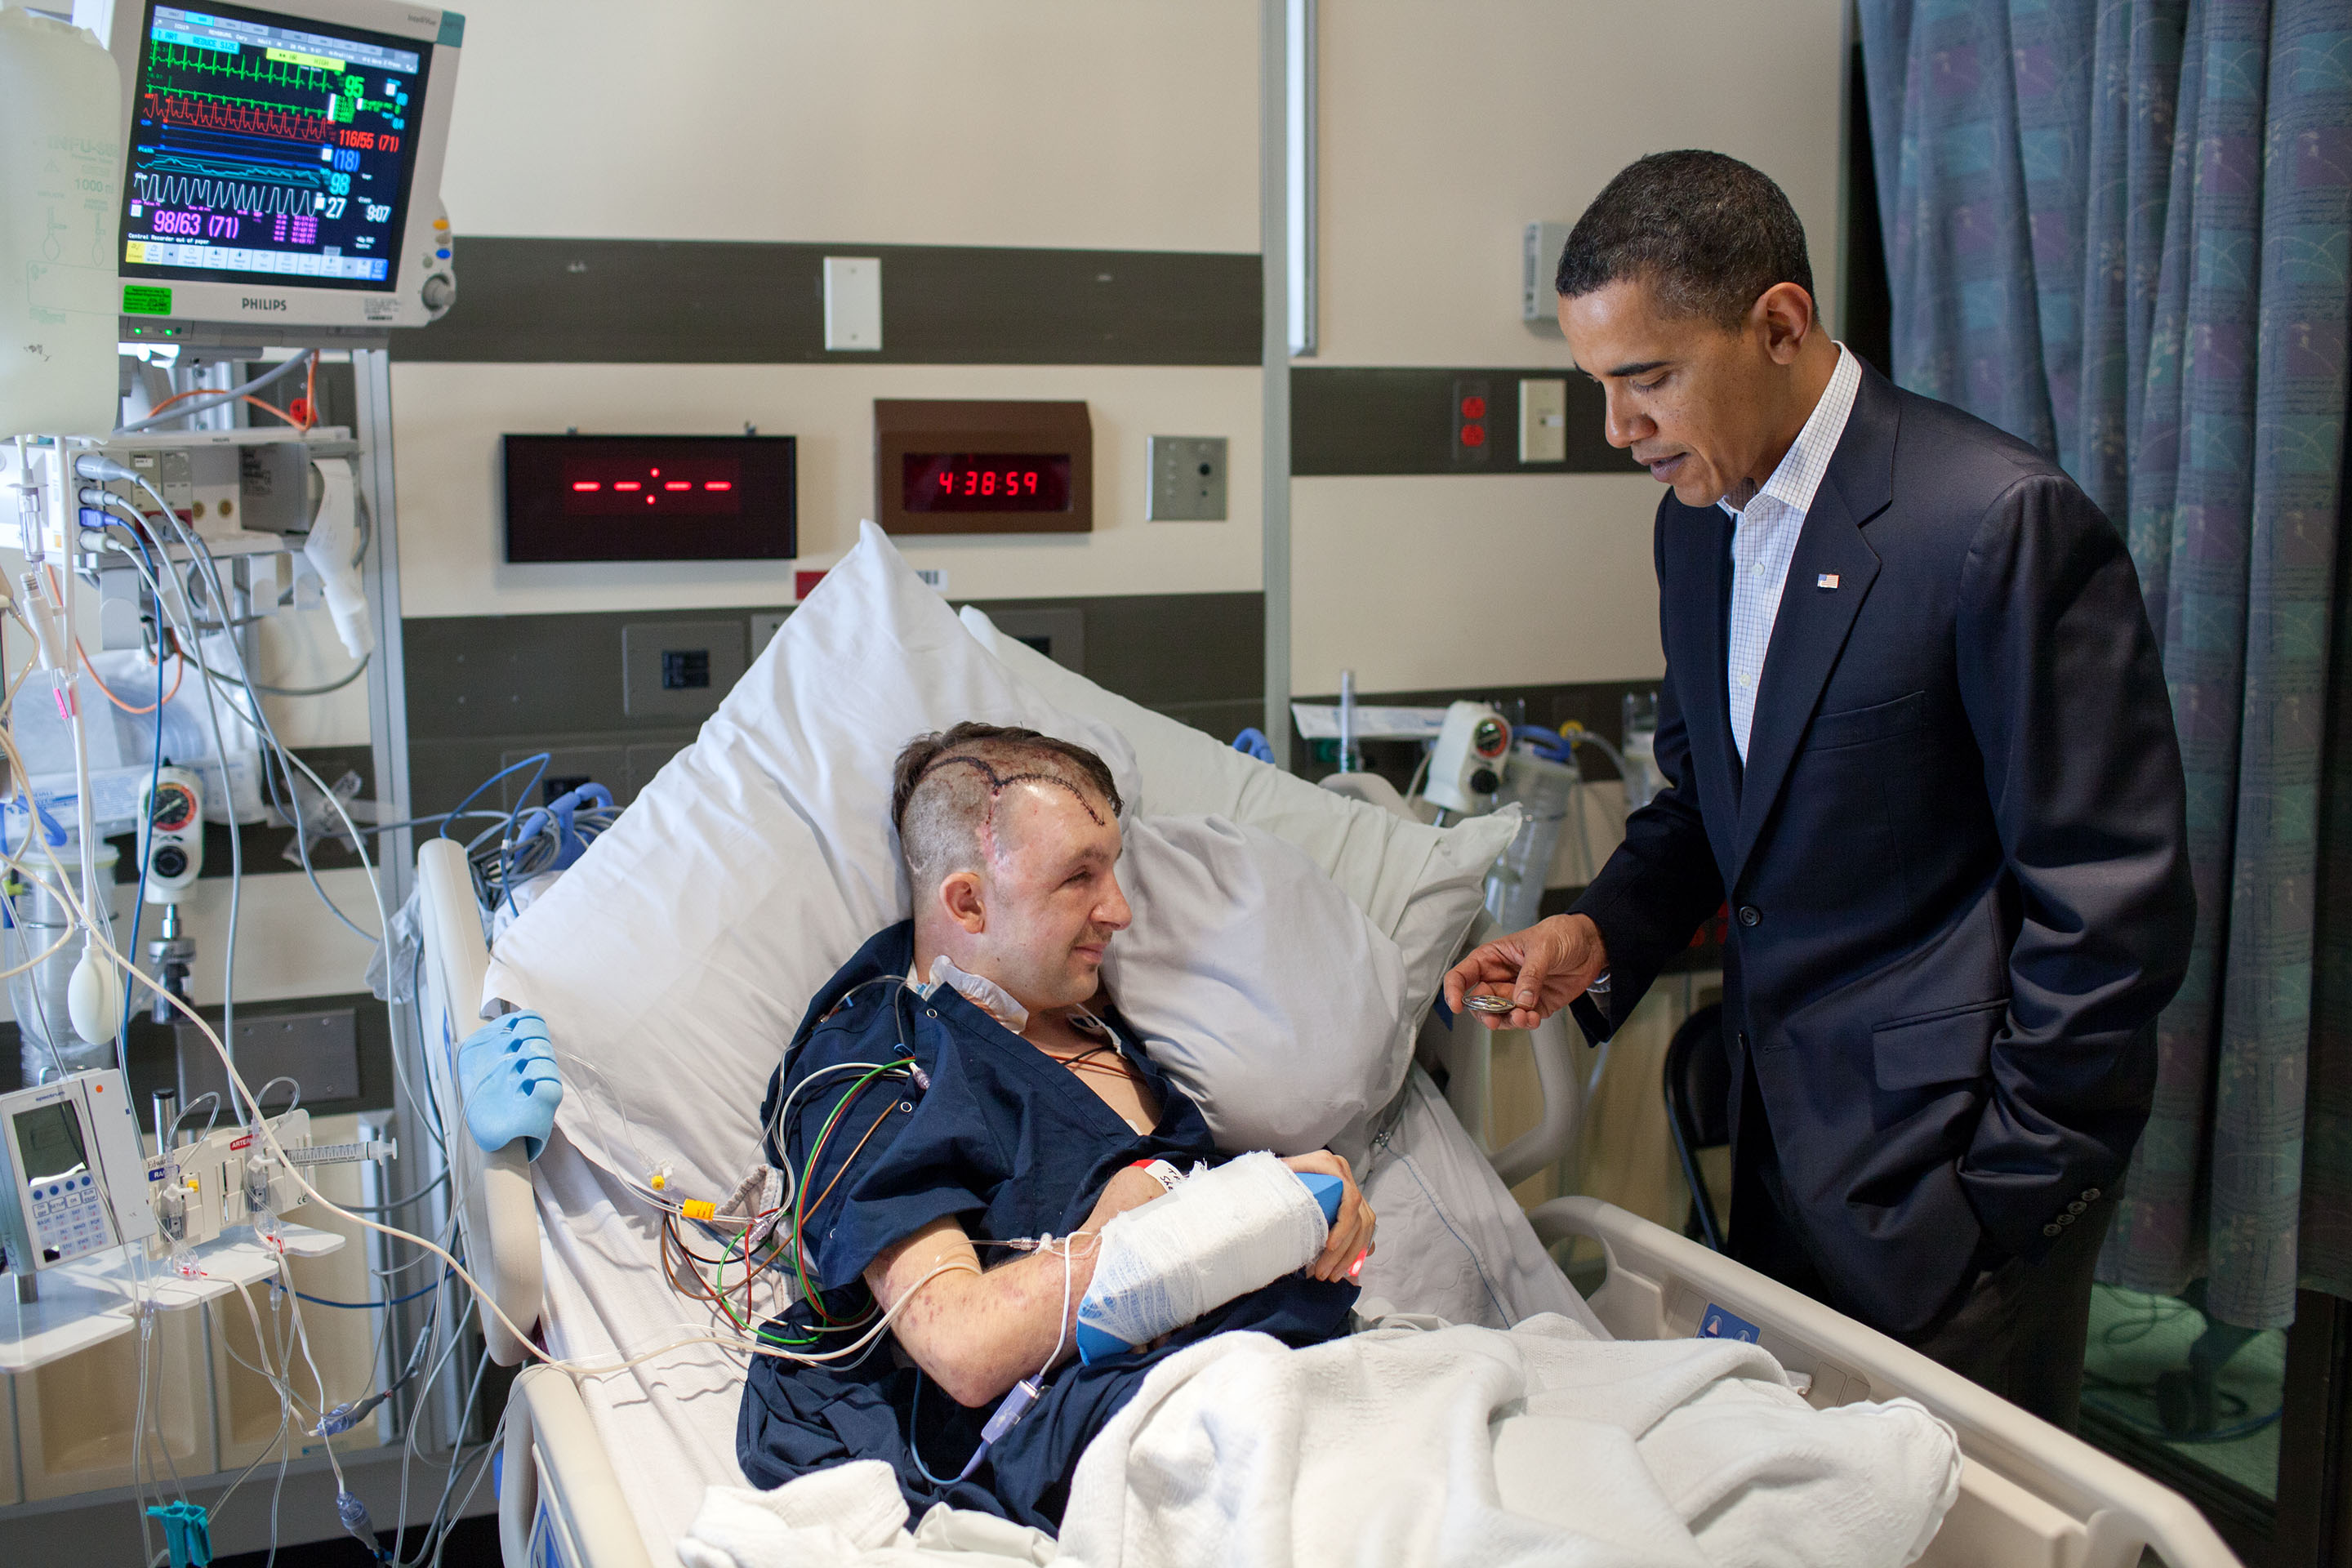 Feb. 28, 2010: President Obama visits Cory Remsburg at the National Naval Medical Center in Bethesda, Md. (Official White House Photo by Pete Souza)